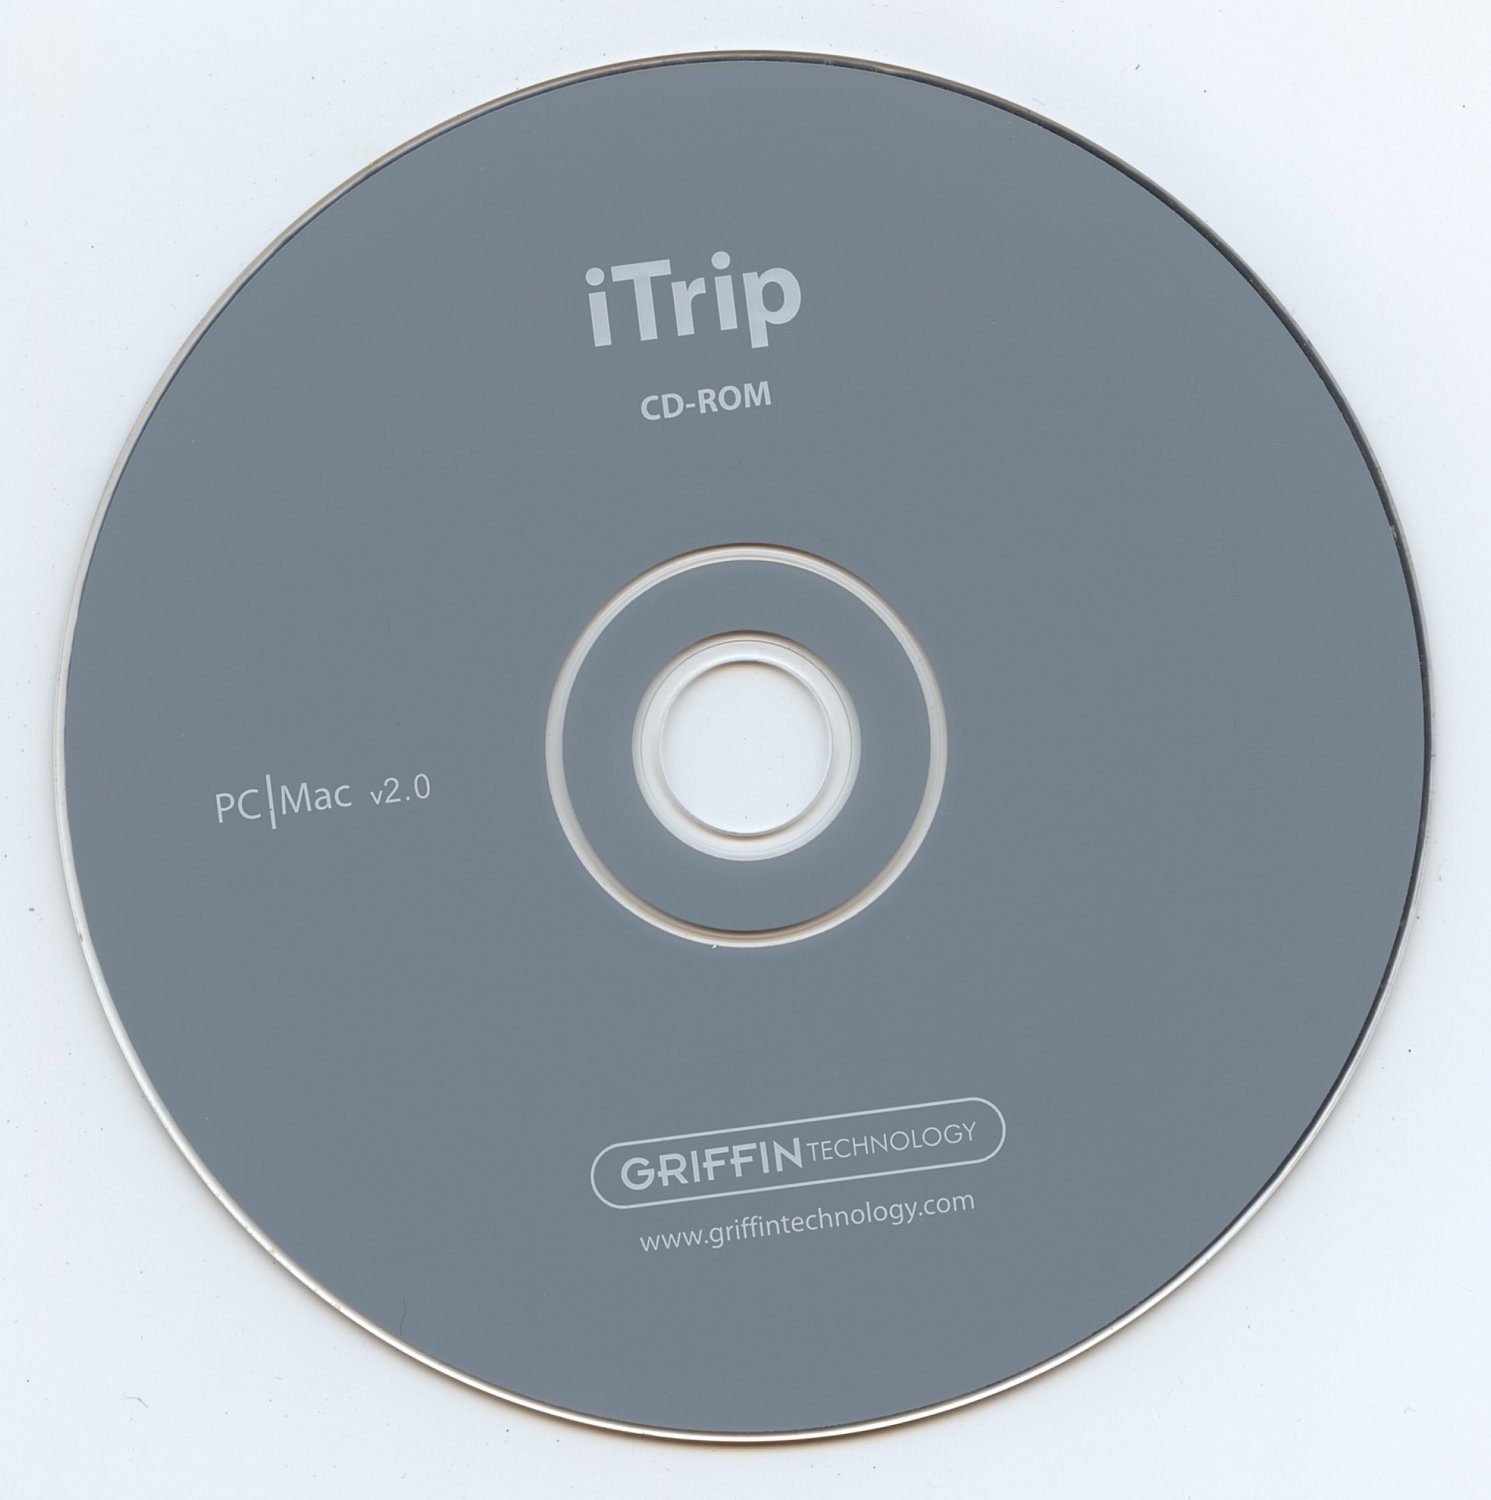 2004 OEM Griffin iTRIP User Manual and CD for PC/Mac V2.0 (EUC)